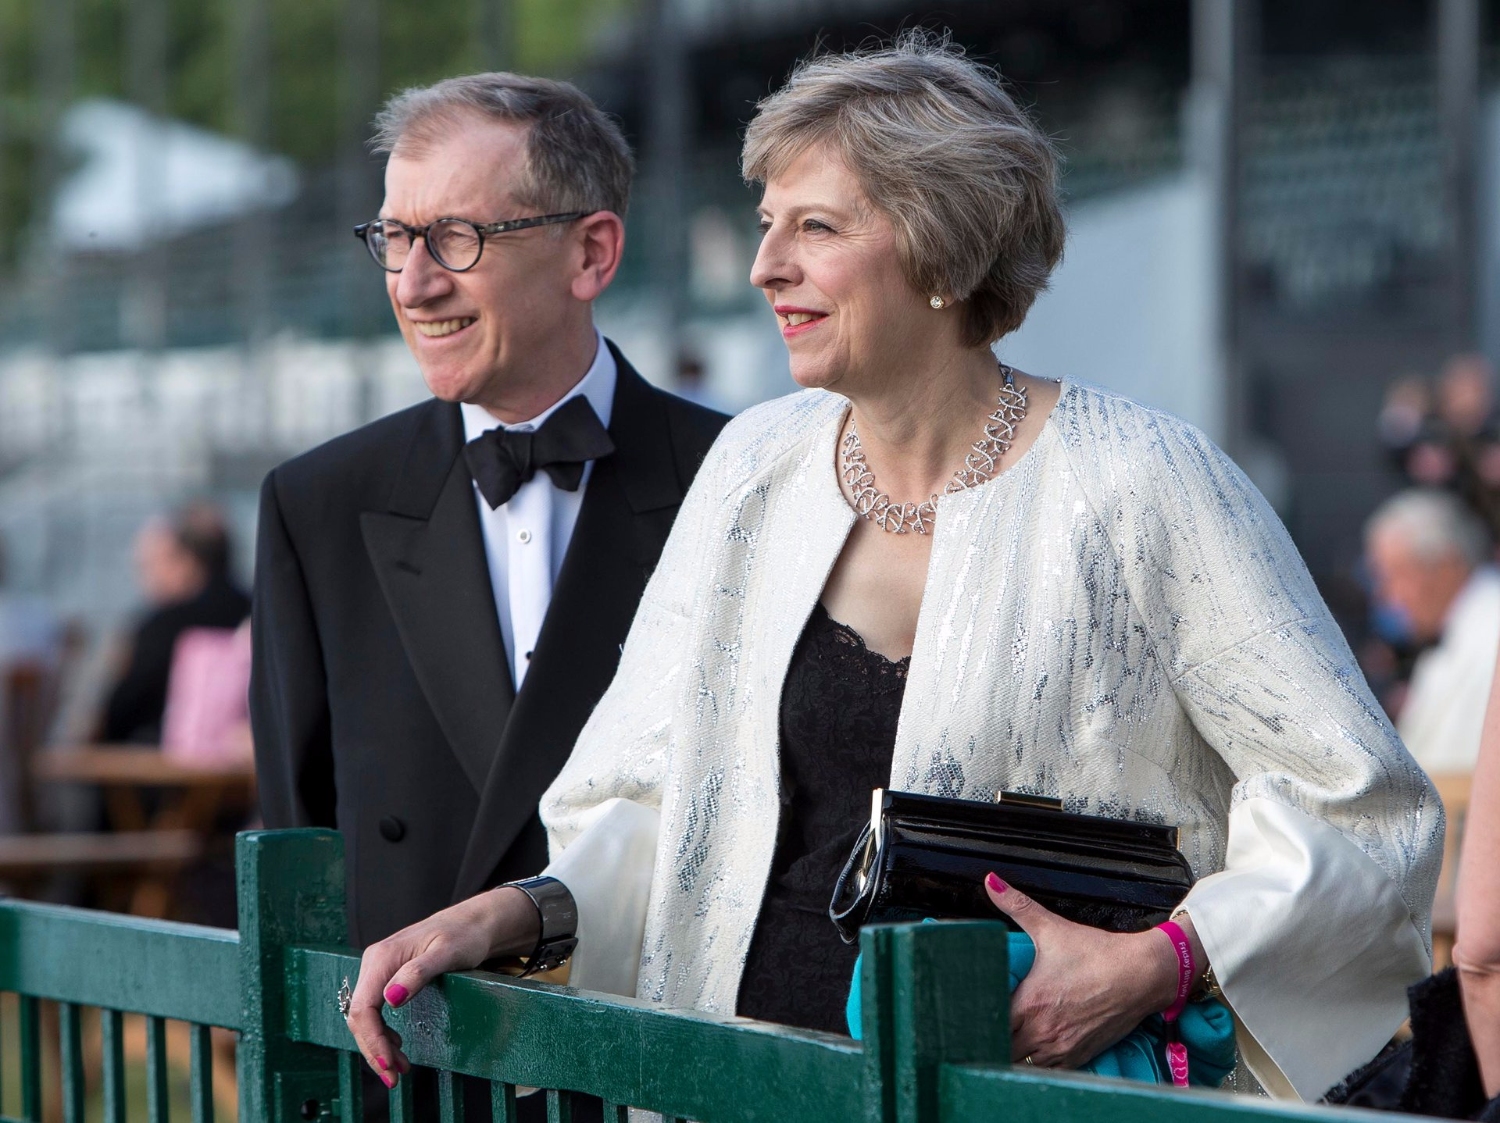  Theresa May seen with husband Philip John May at the Henley festival over the weekend. Photograph: Adam Sorenson/Barcroft Images